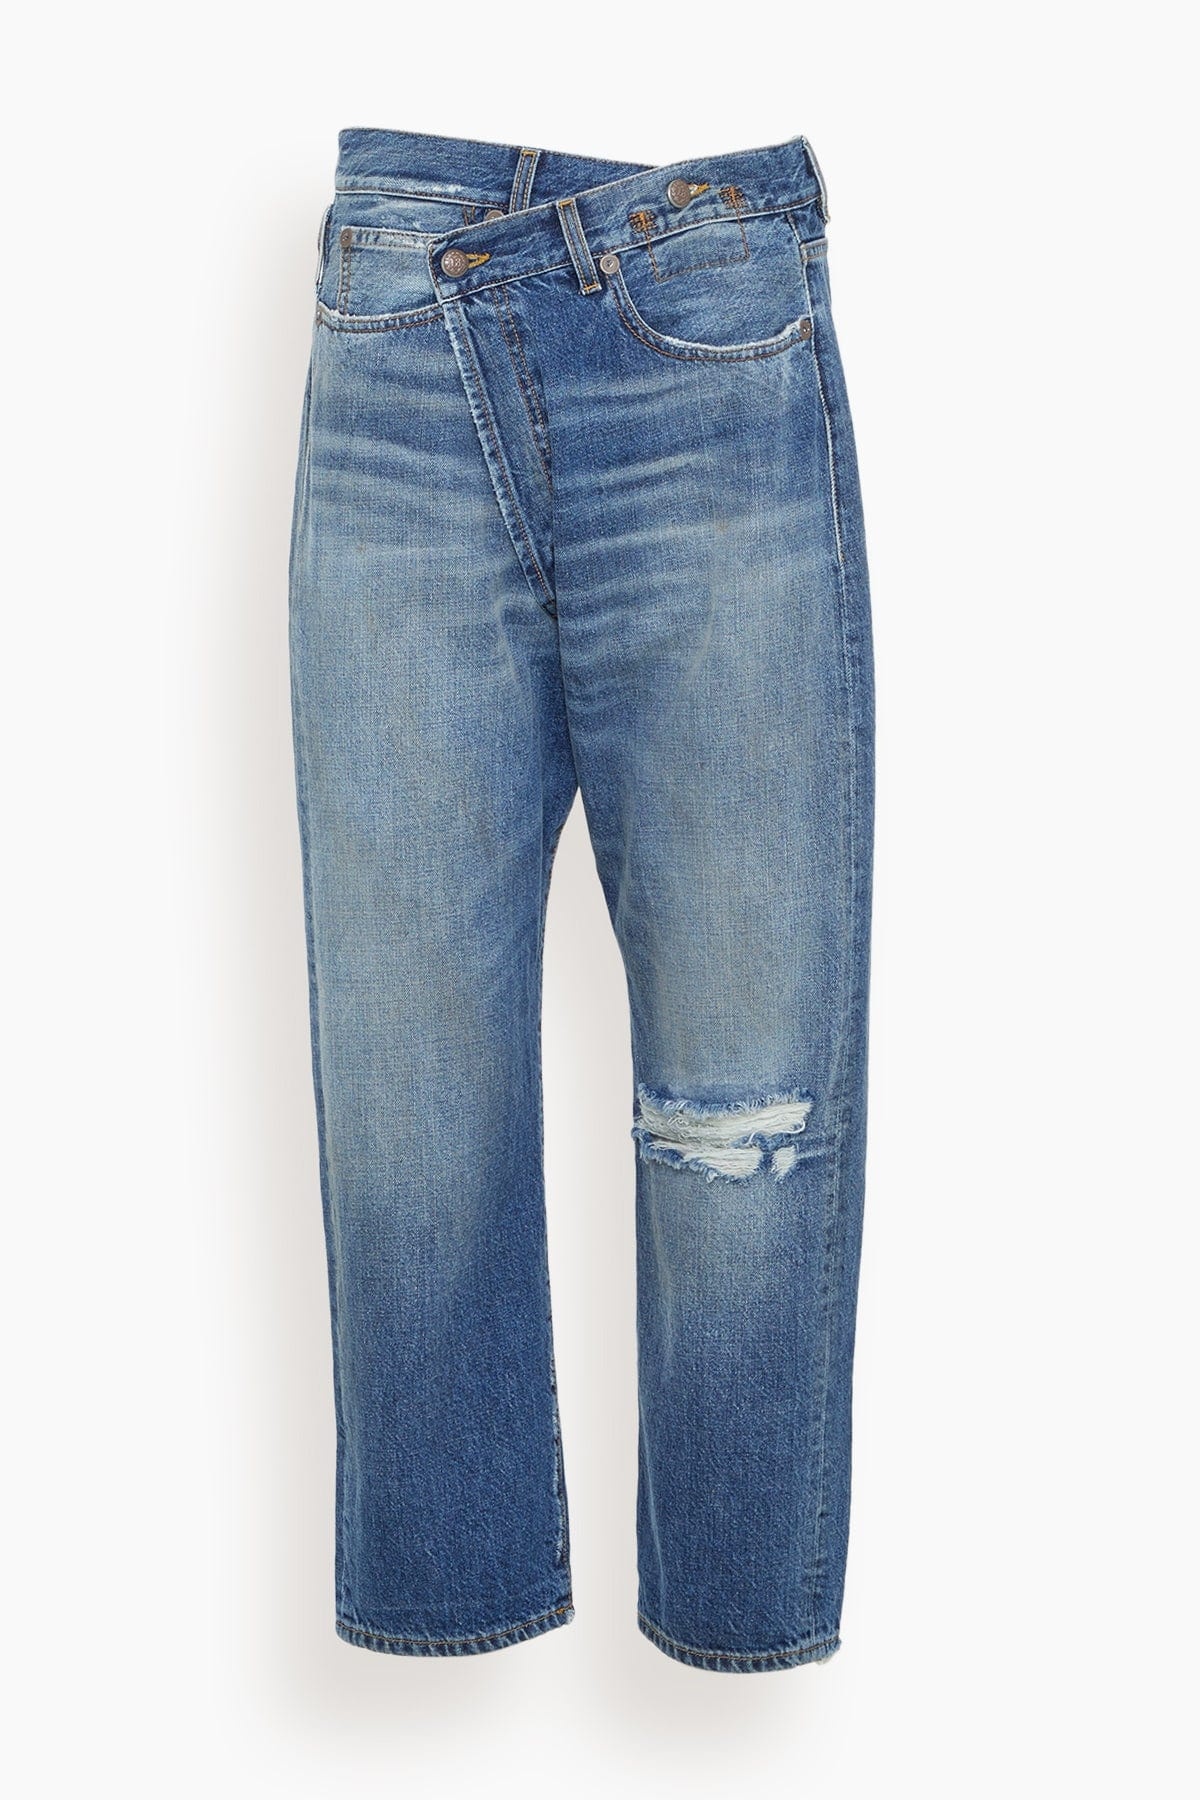 Crossover Jean in Amber Blue - 1